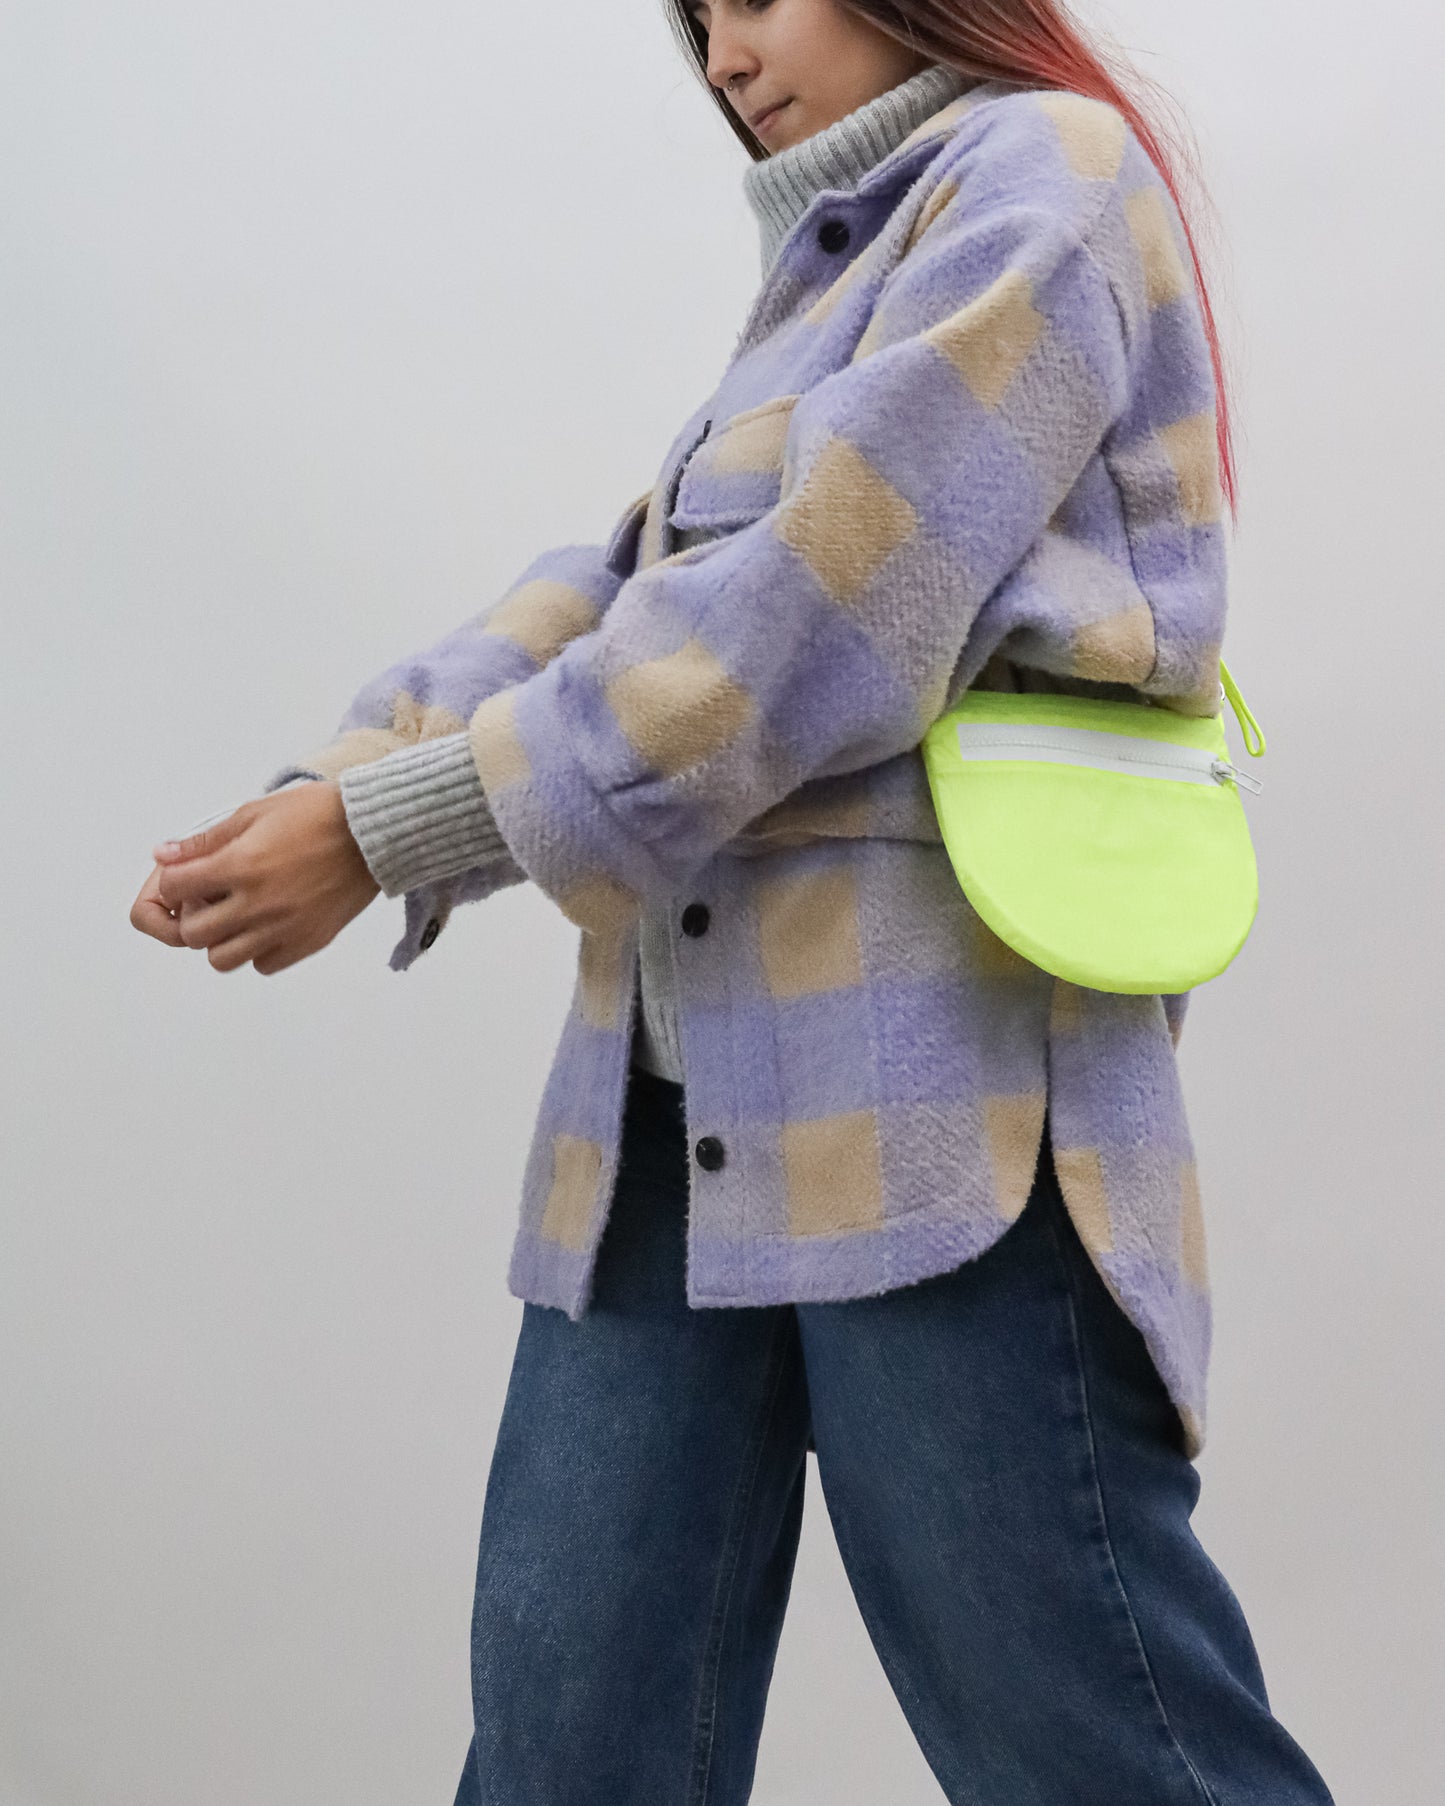 Model wearing sling bag in neon yellow and white made from a vintage paraglider